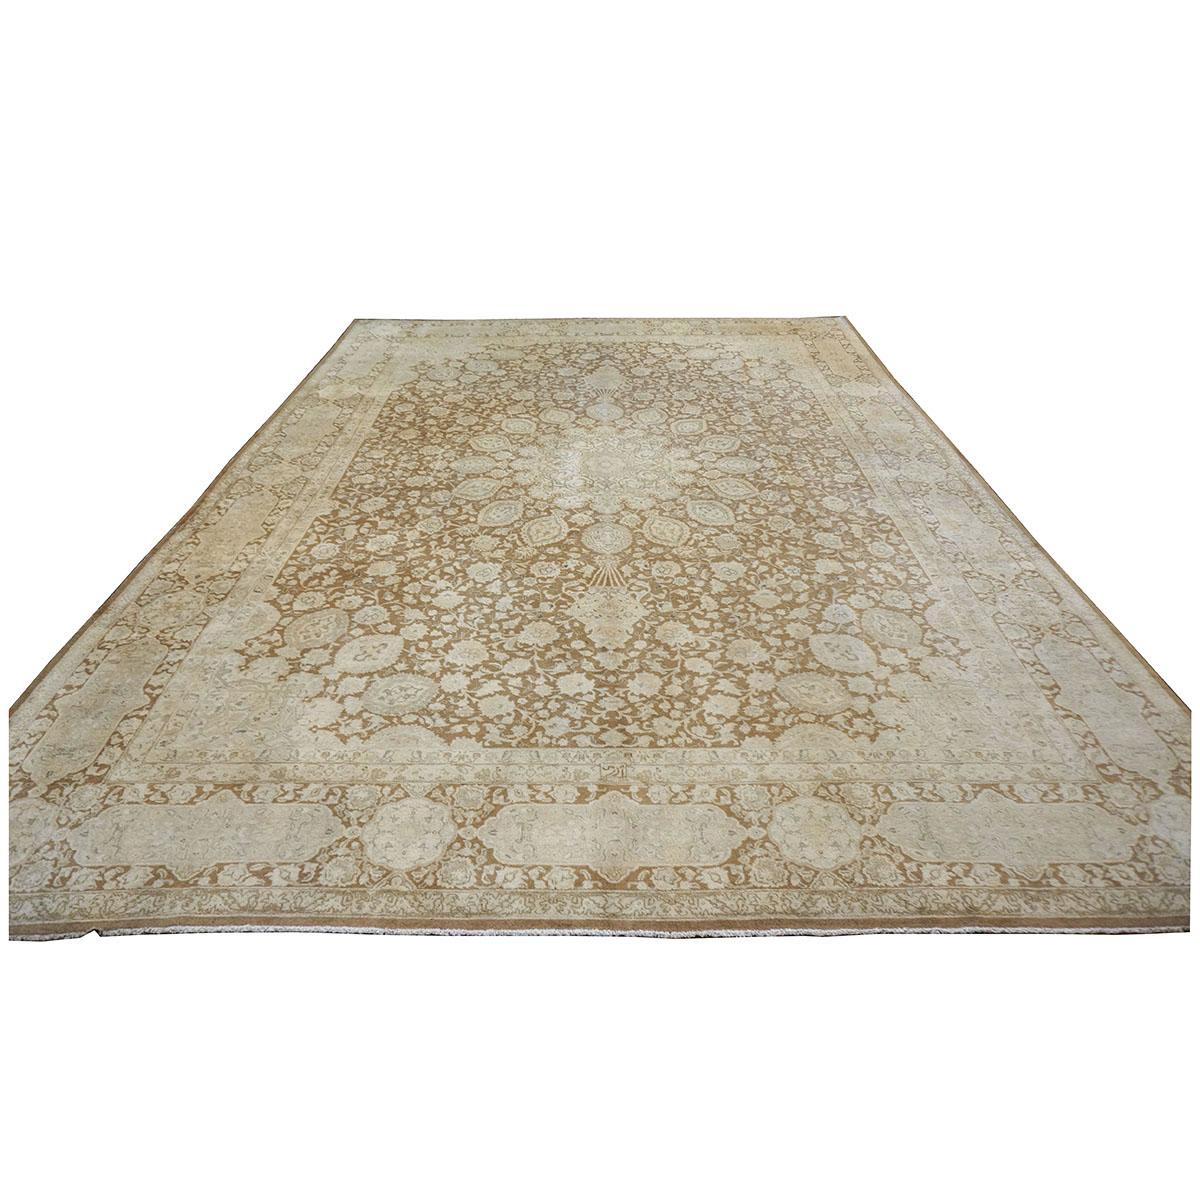 Antique 1940s Persian Tabriz 10x13 Tan, Brown, & Ivory Handmade Area Rug In Good Condition For Sale In Houston, TX